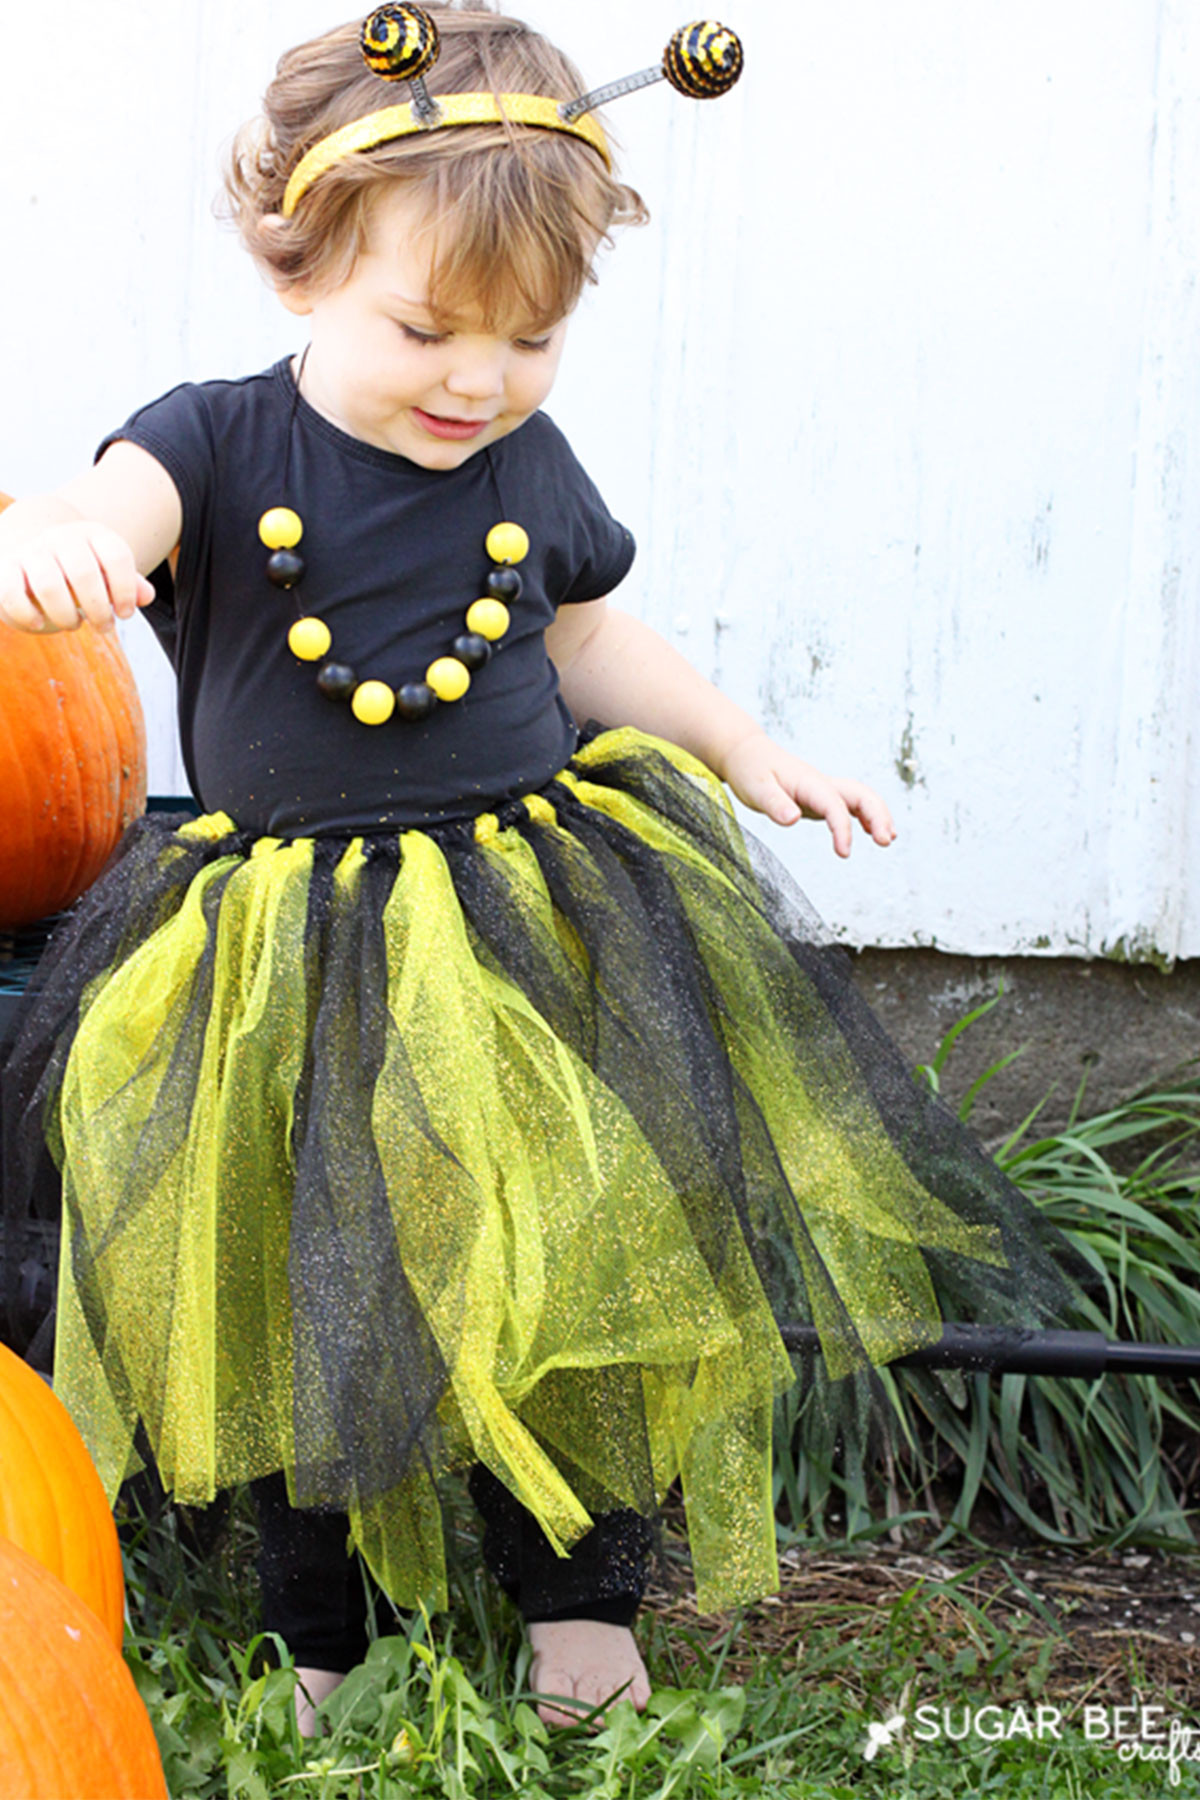 Easy DIY Costumes For Toddlers
 55 Homemade Halloween Costumes for Kids Easy DIY Ideas